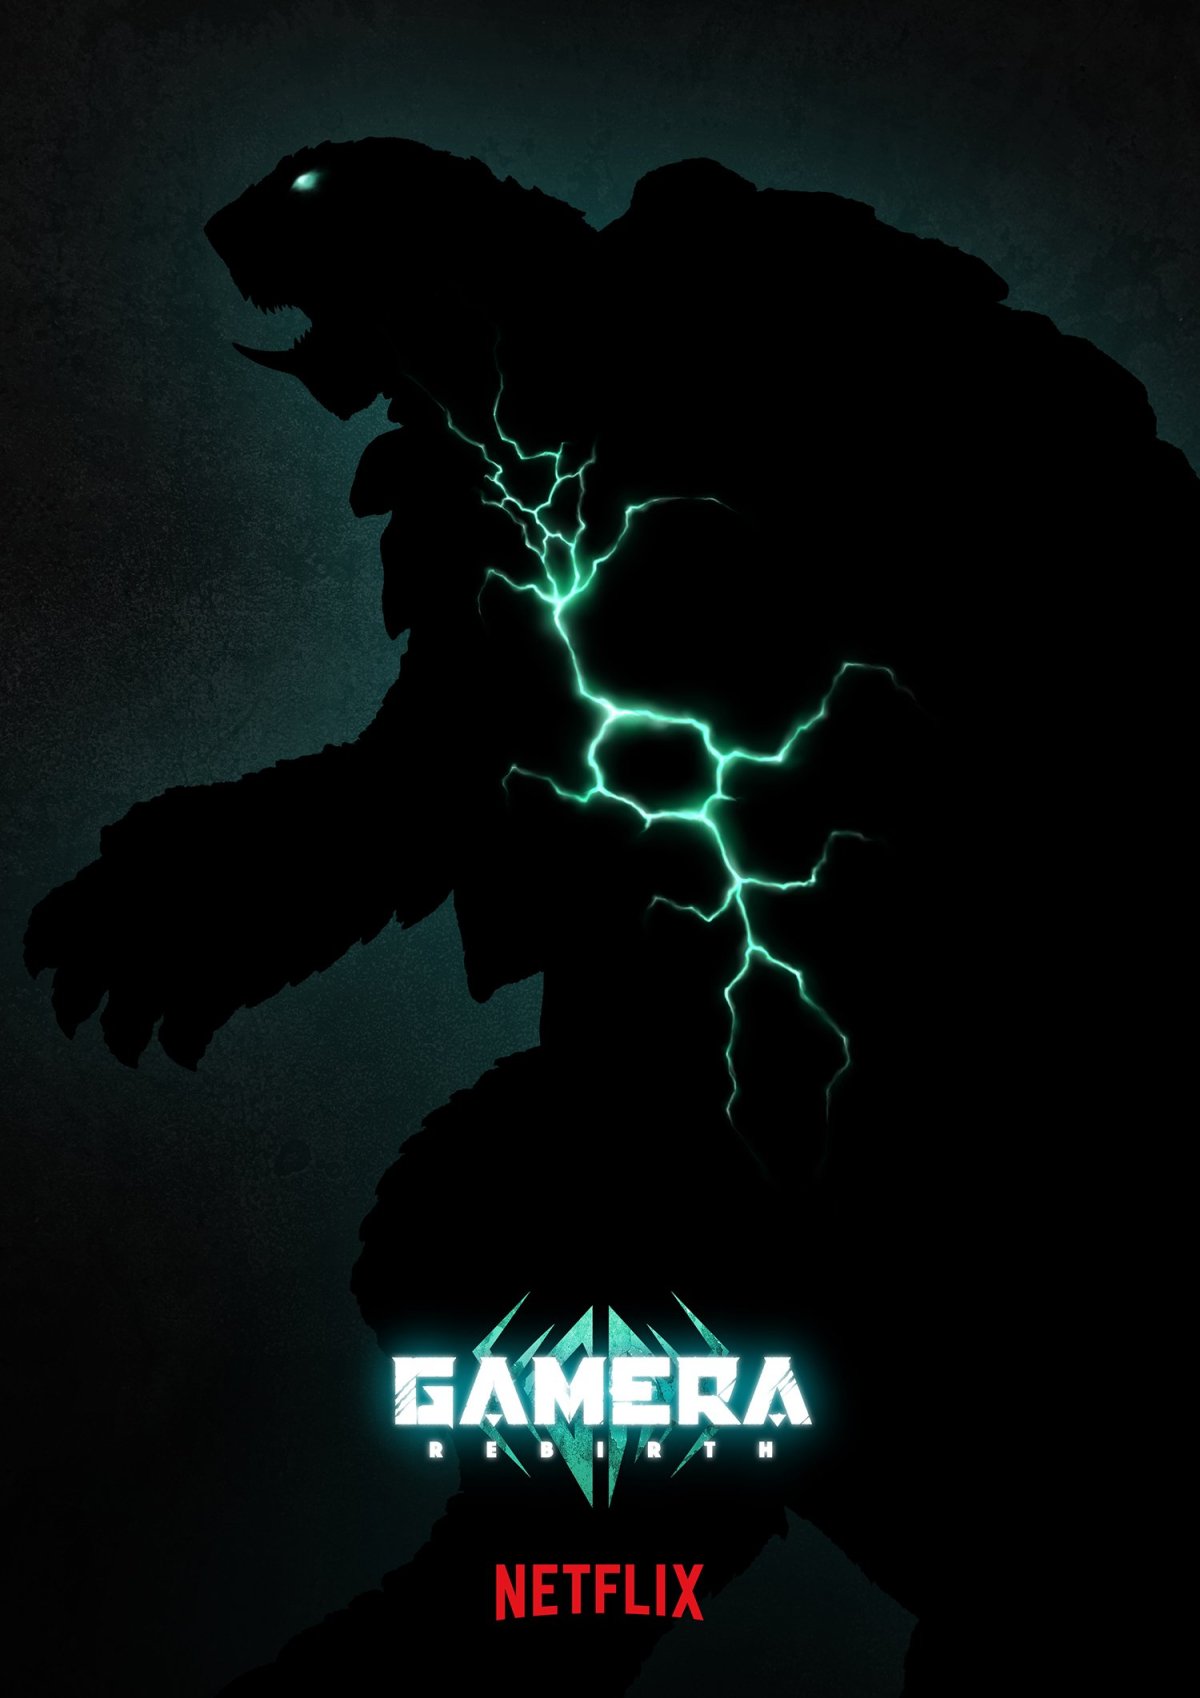 Kadokawa and Netflix announced Gamera- Rebirth, a new project starring the kaiju, and a figure is also on the way